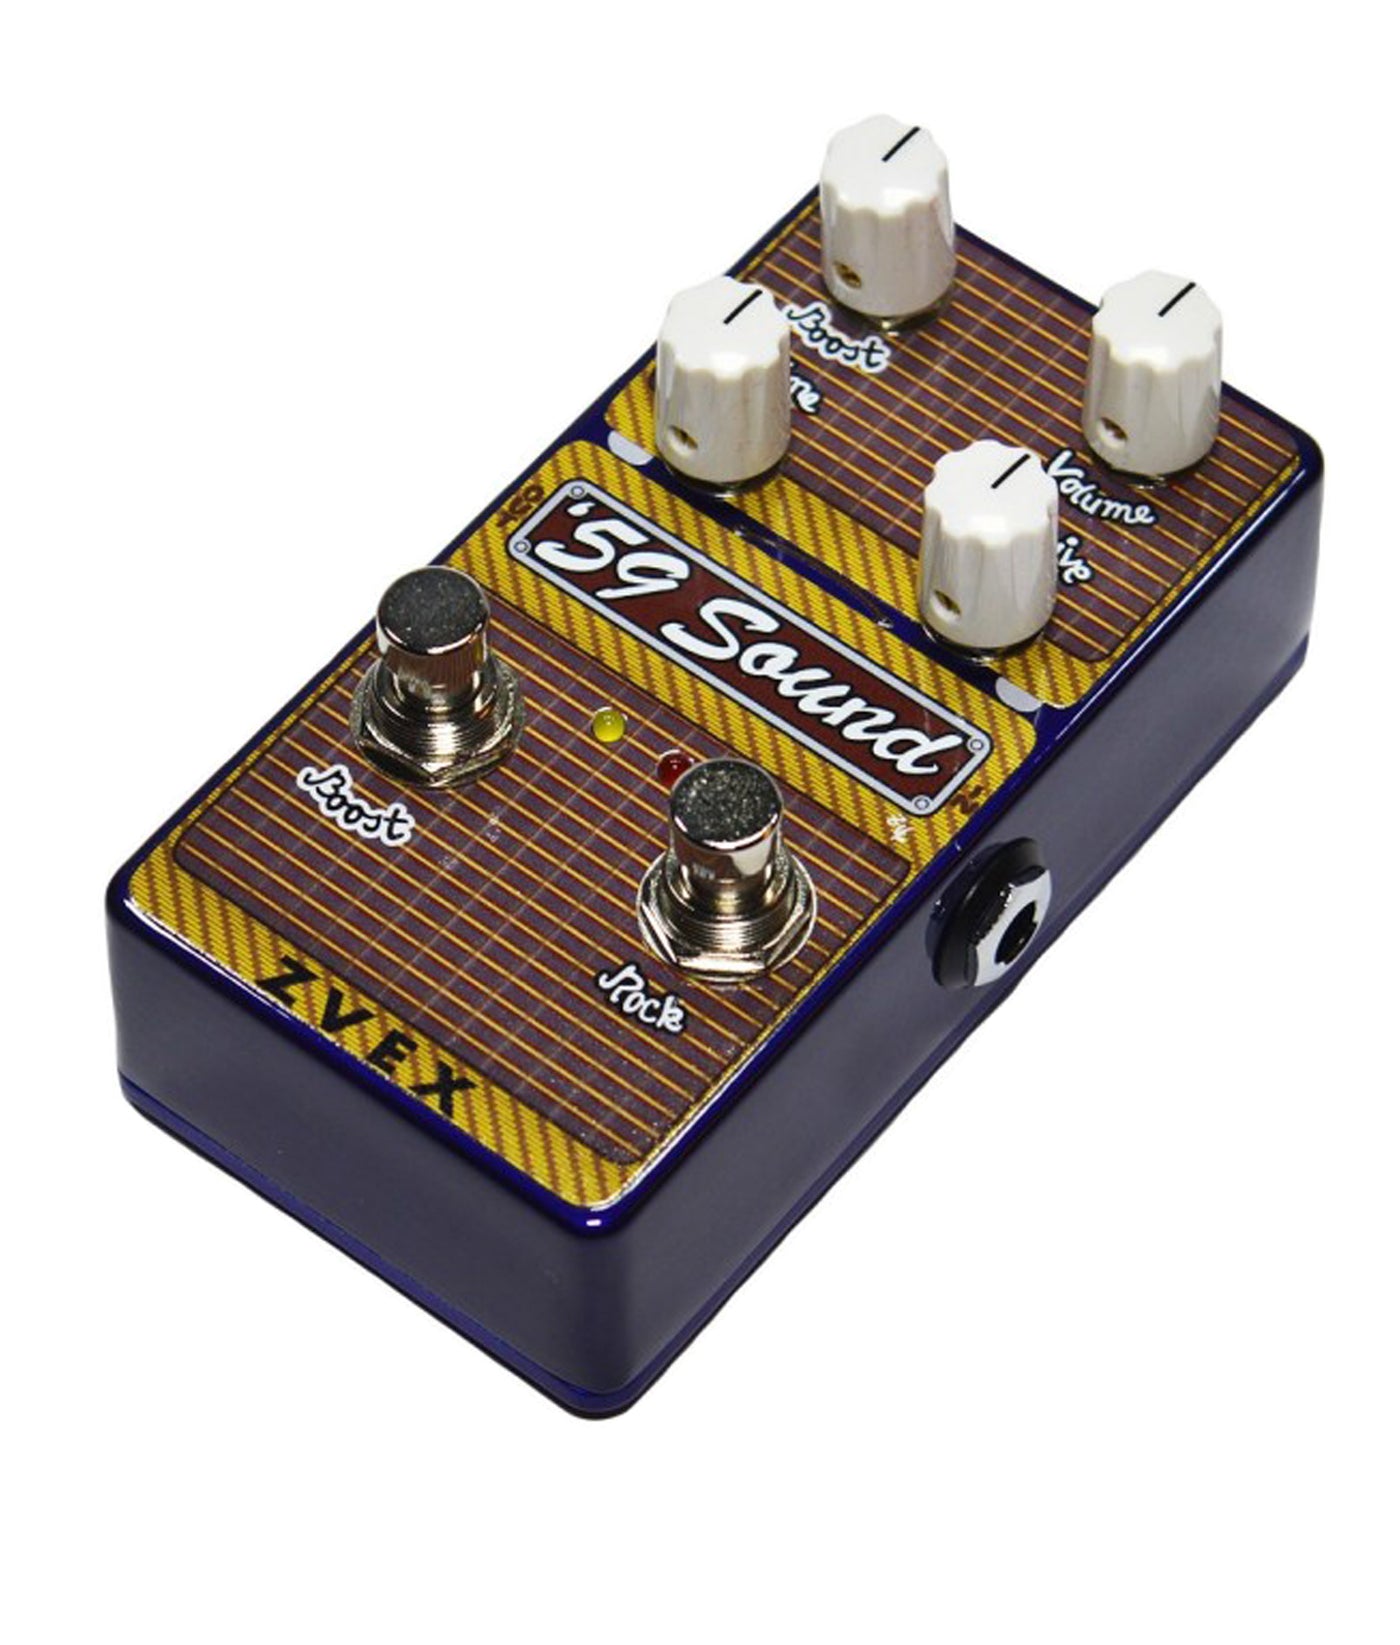 Zvex Vertical 59' Sound Overdrive Pedal